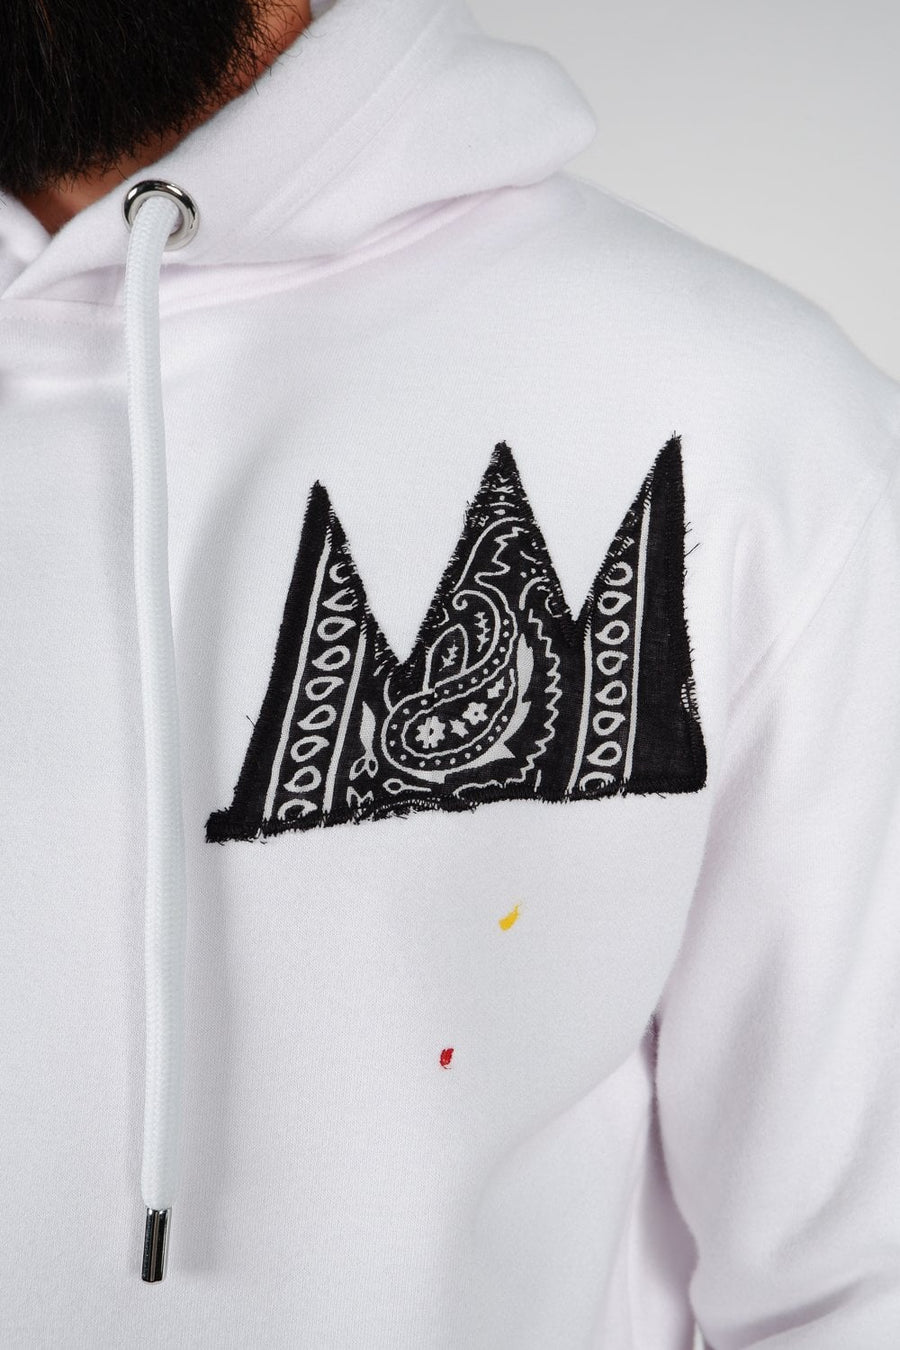 Buy the ABE Revenge Hoodie in White at Intro. Spend £50 for free UK delivery. Official stockists. We ship worldwide.